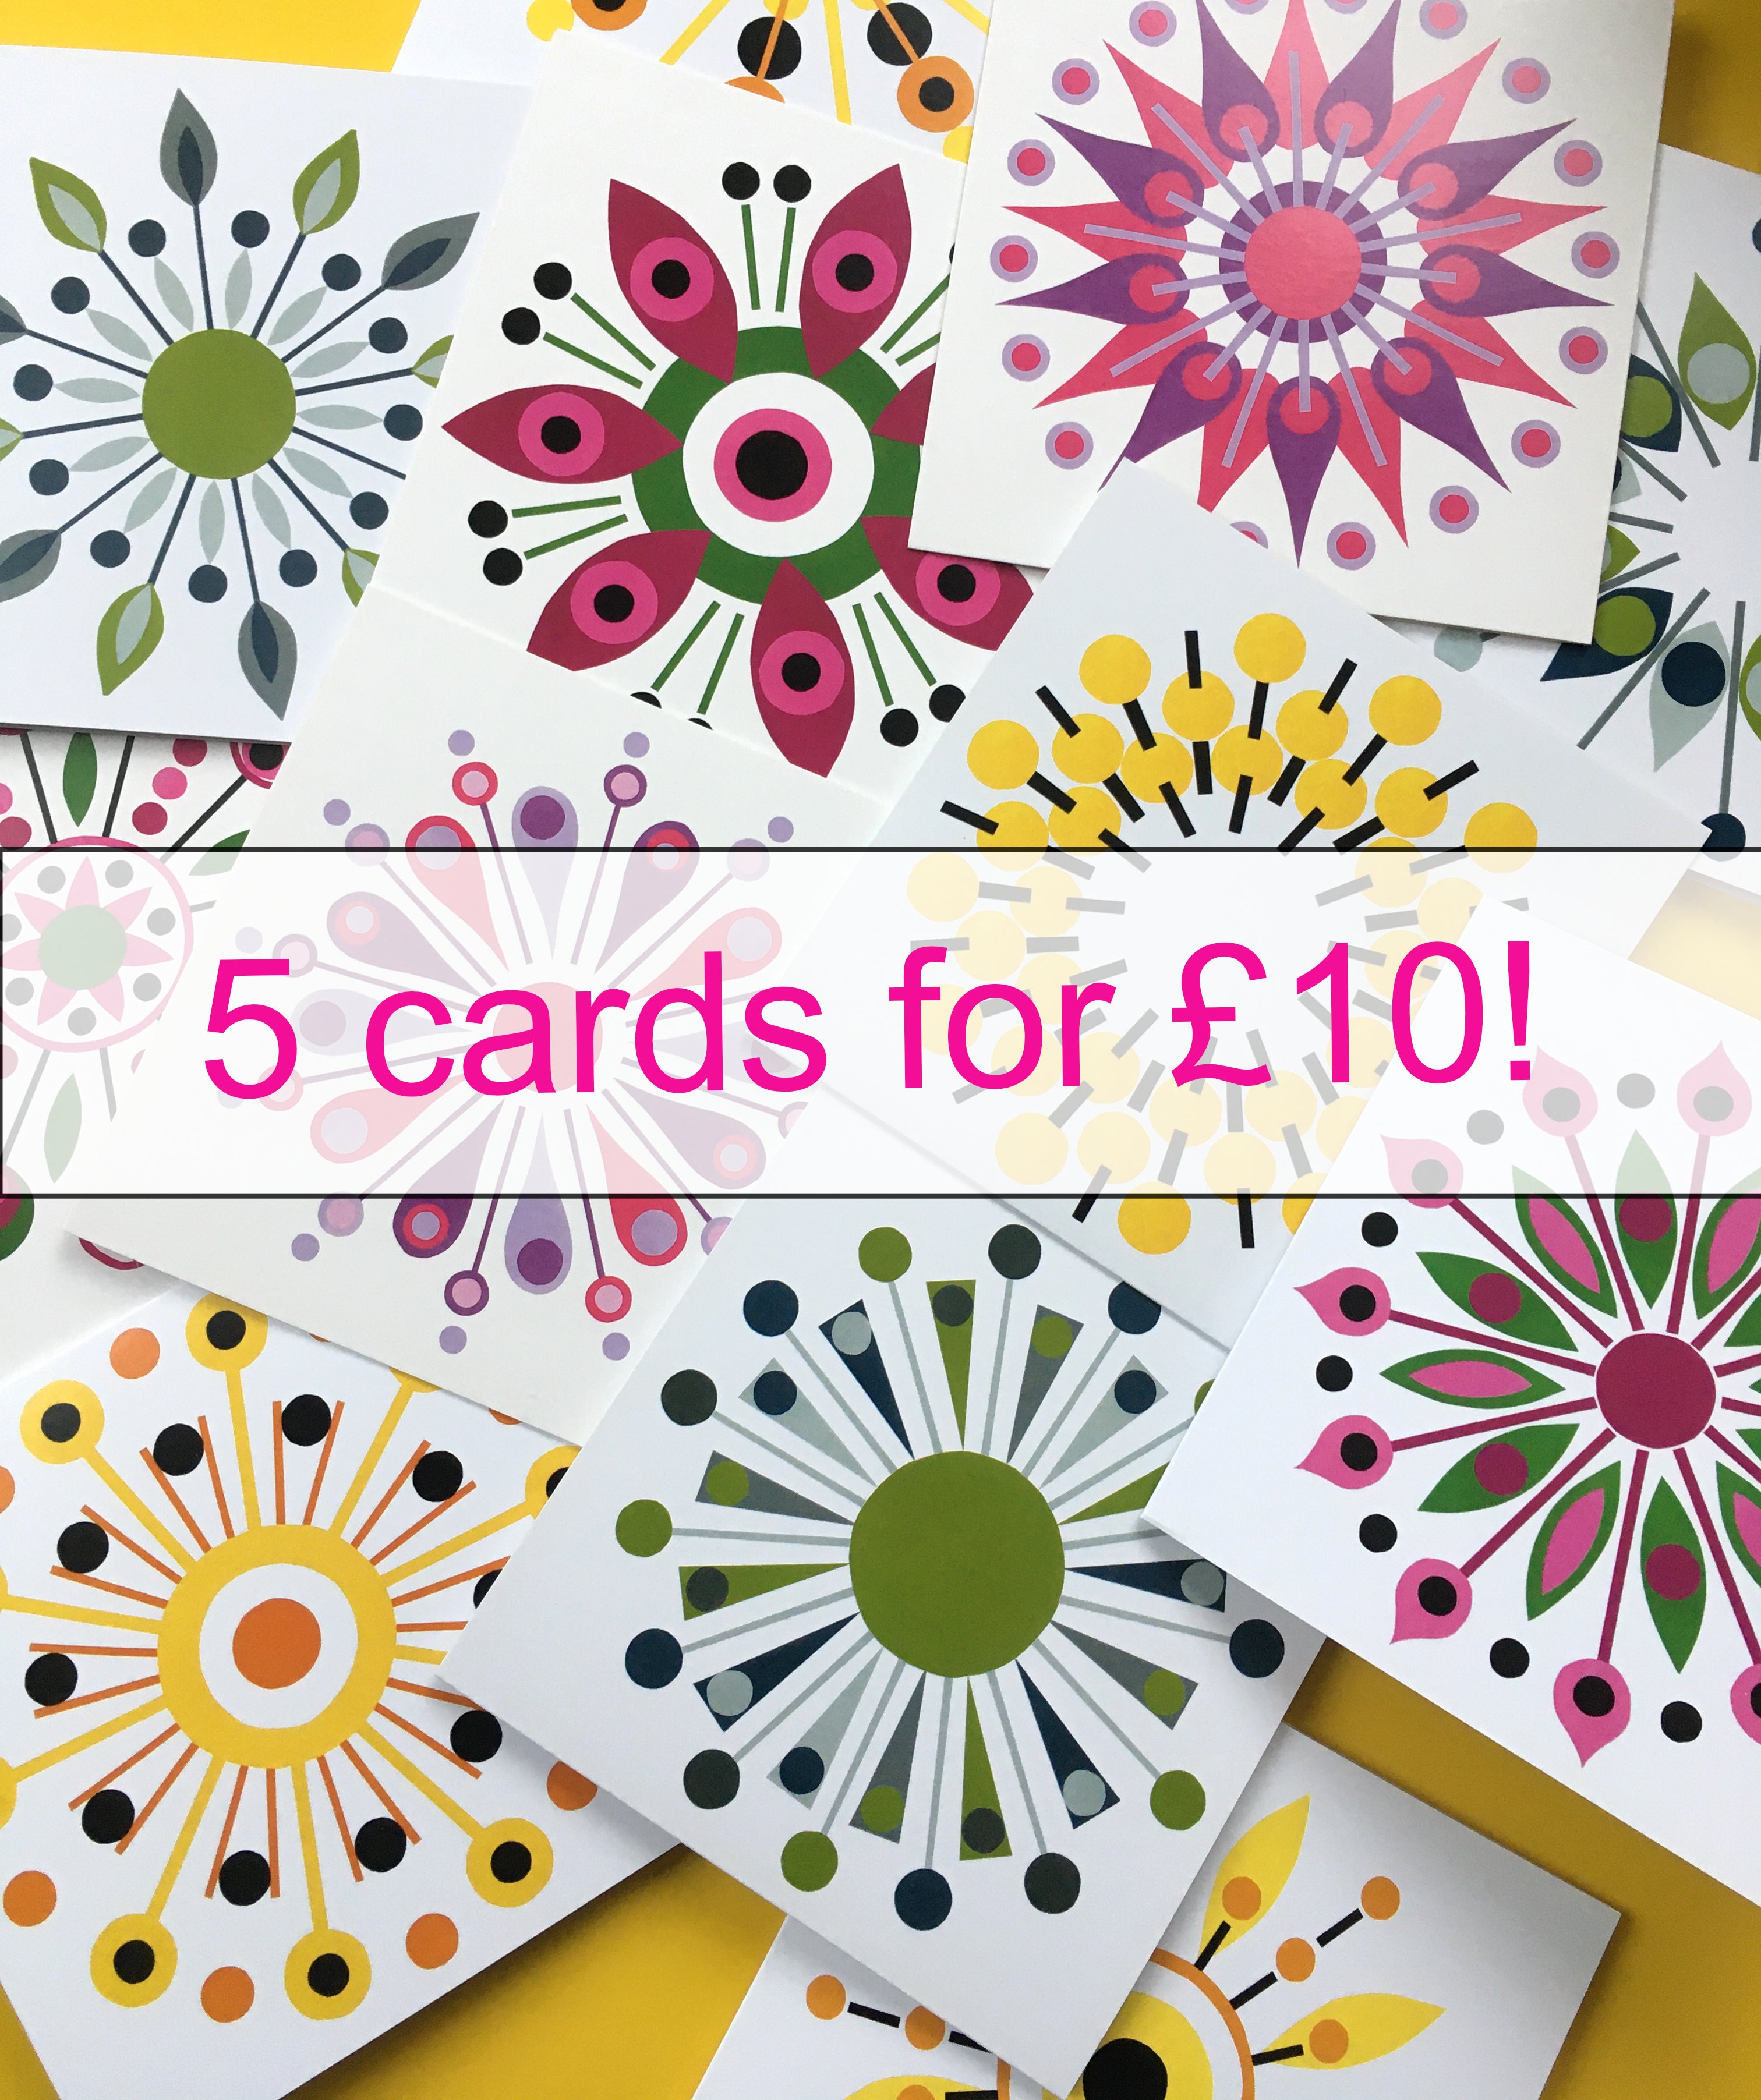 5 greeting cards for Ten Pounds!